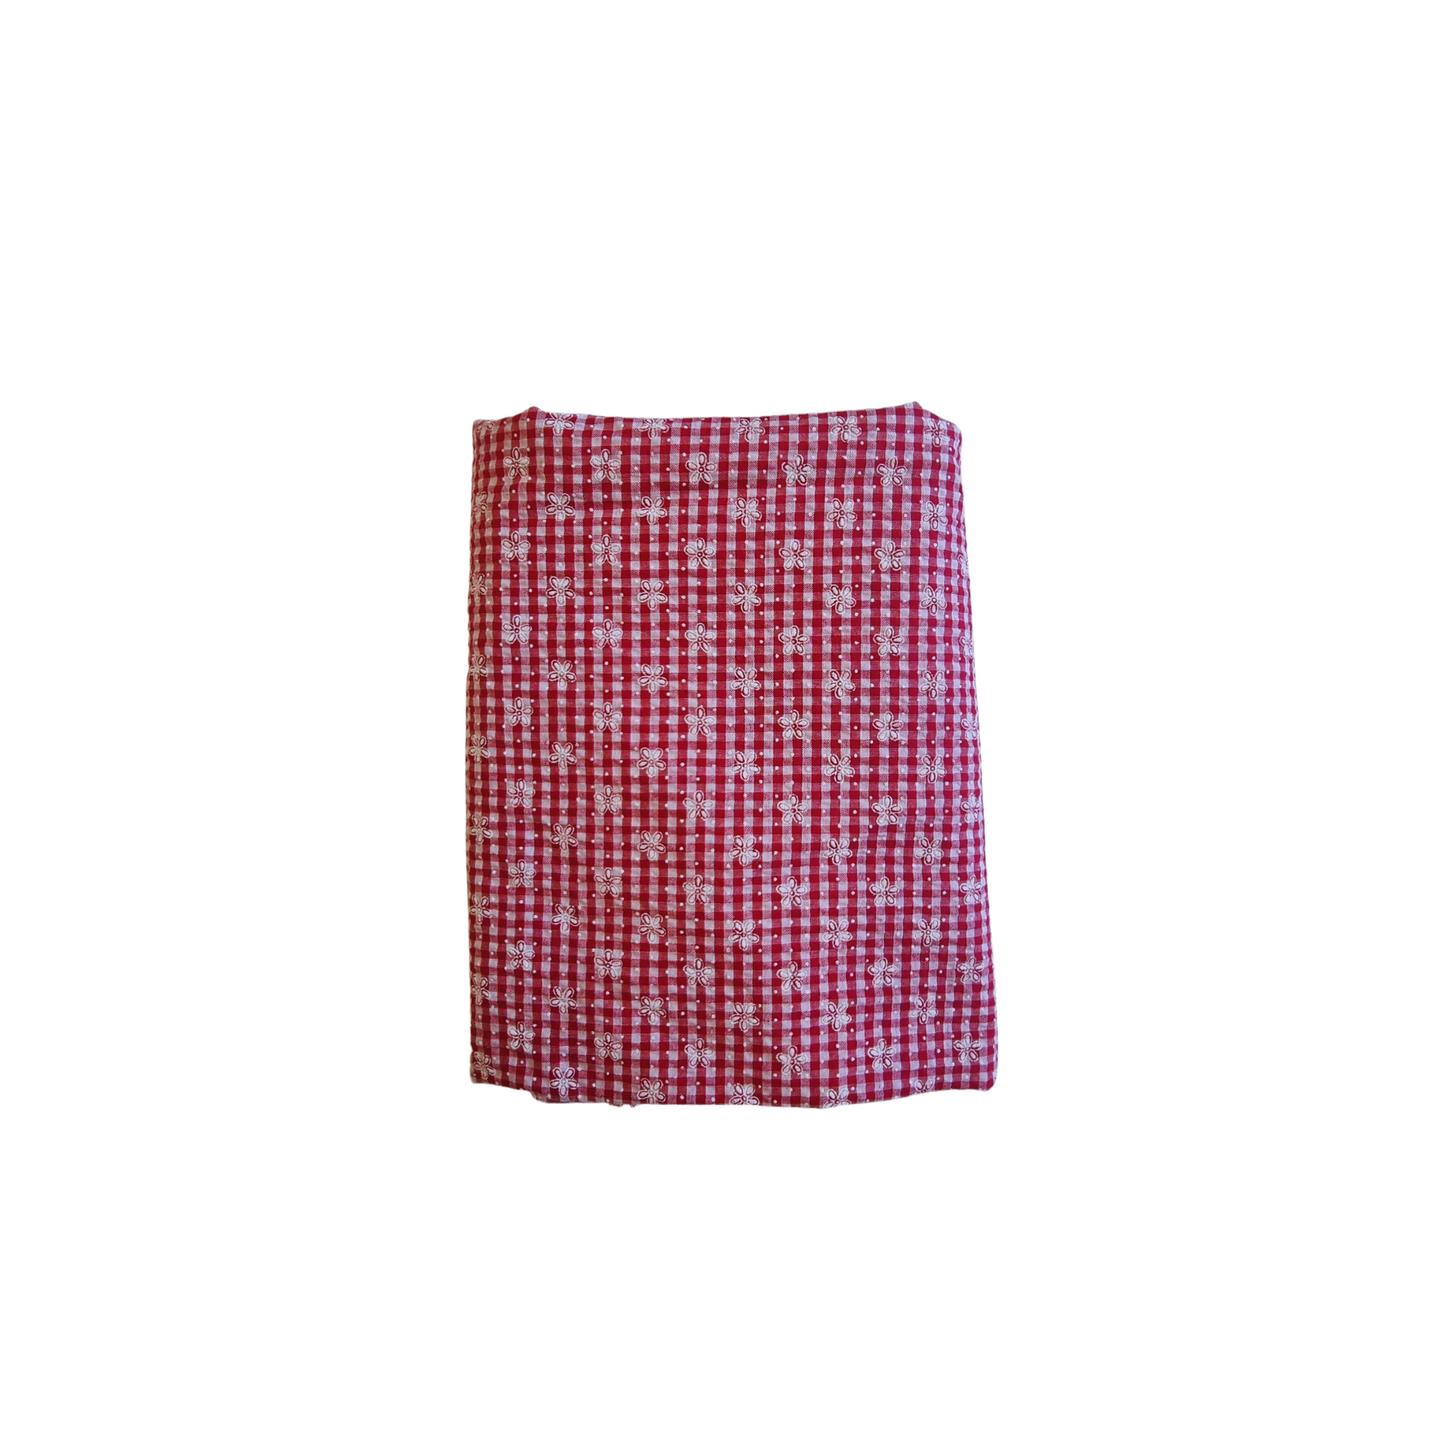 93 cm x 140 cm | Red Cotton Embroidered Gingham